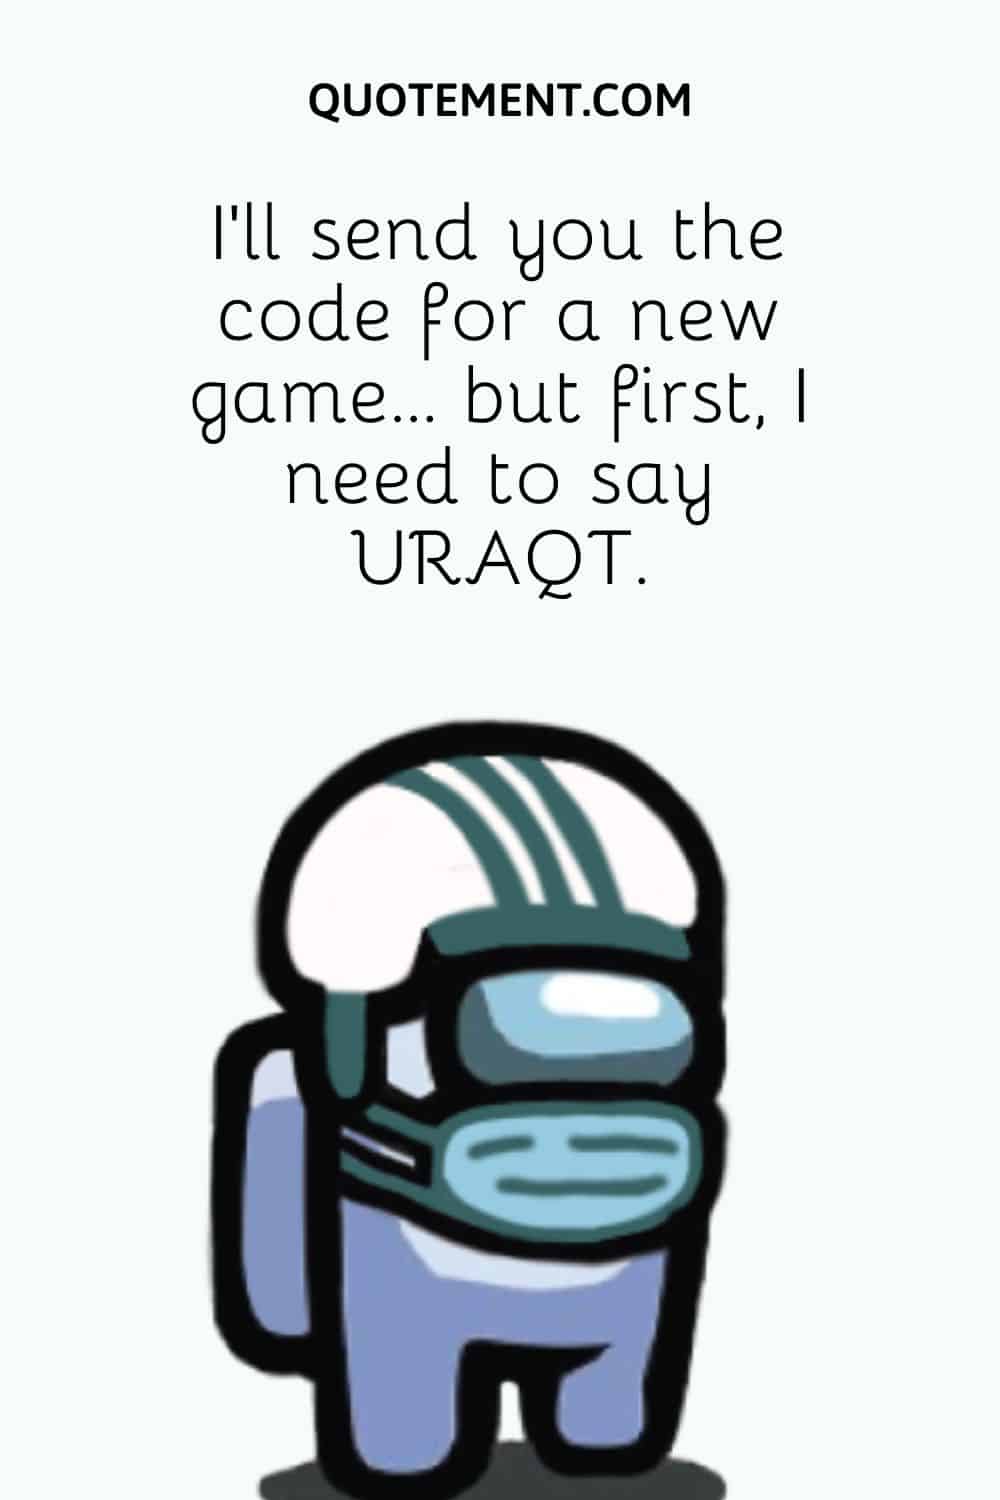 I’ll send you the code for a new game… but first, I need to say URAQT.